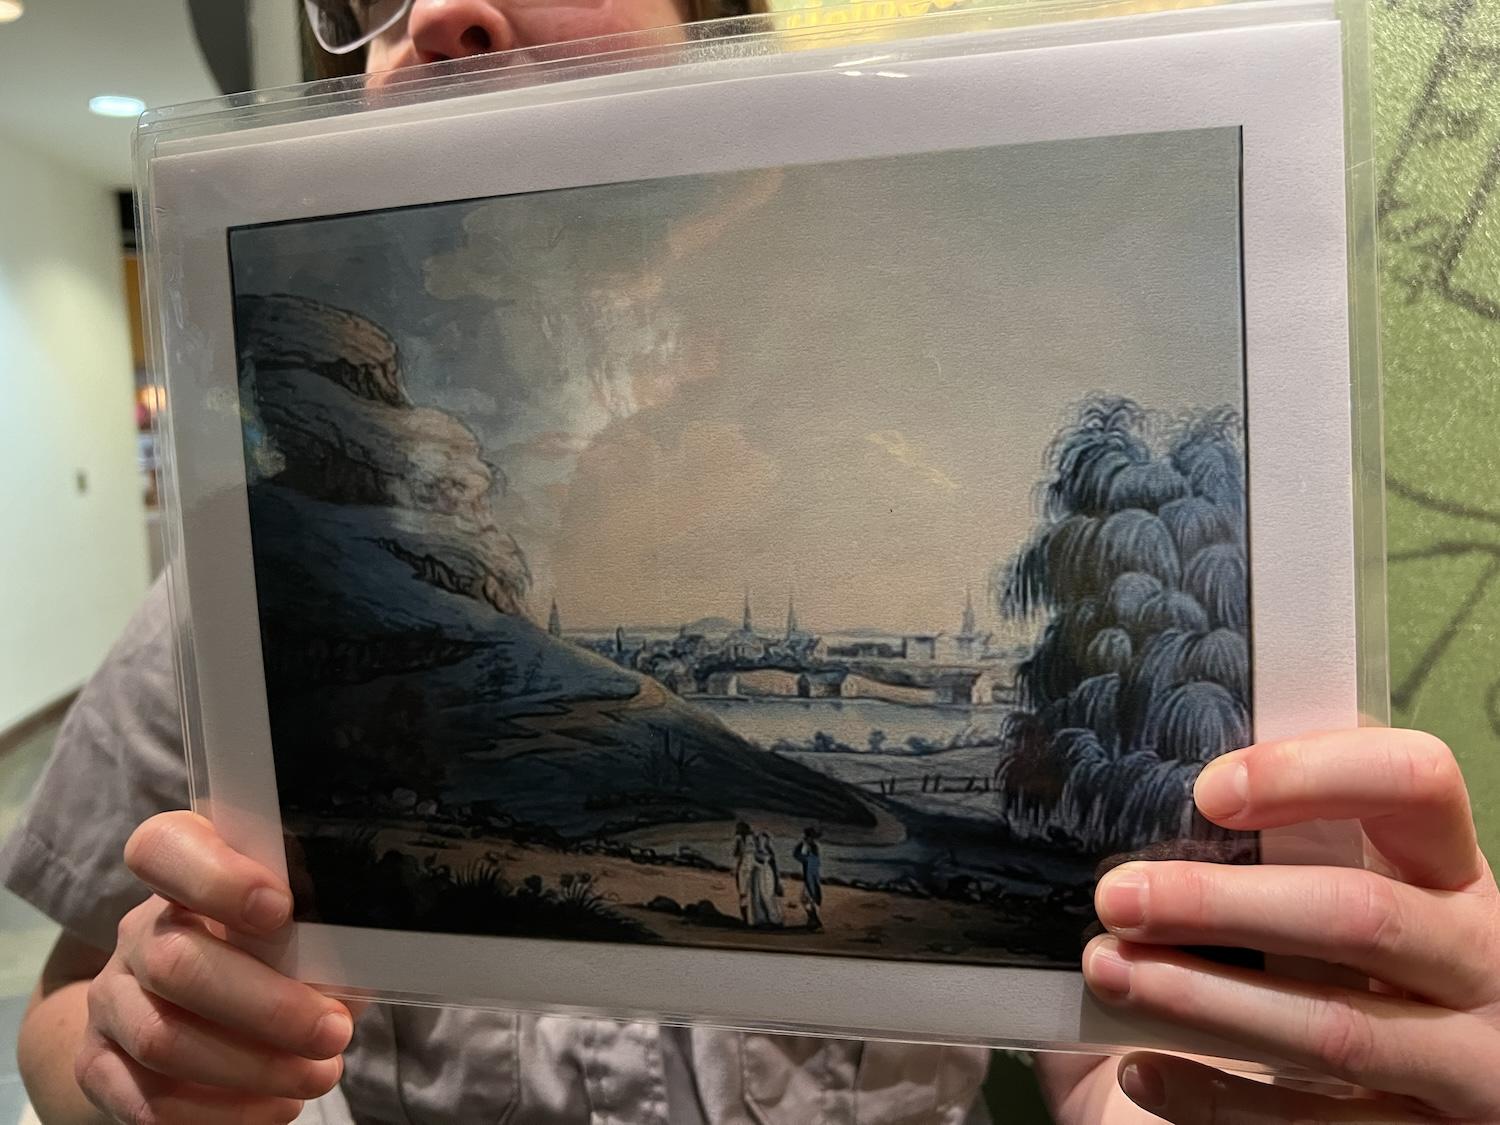 Ranger Bethany Burnett shows a 1798 image of how Manhattan looked when it was a hilly wilderness with a large lake.